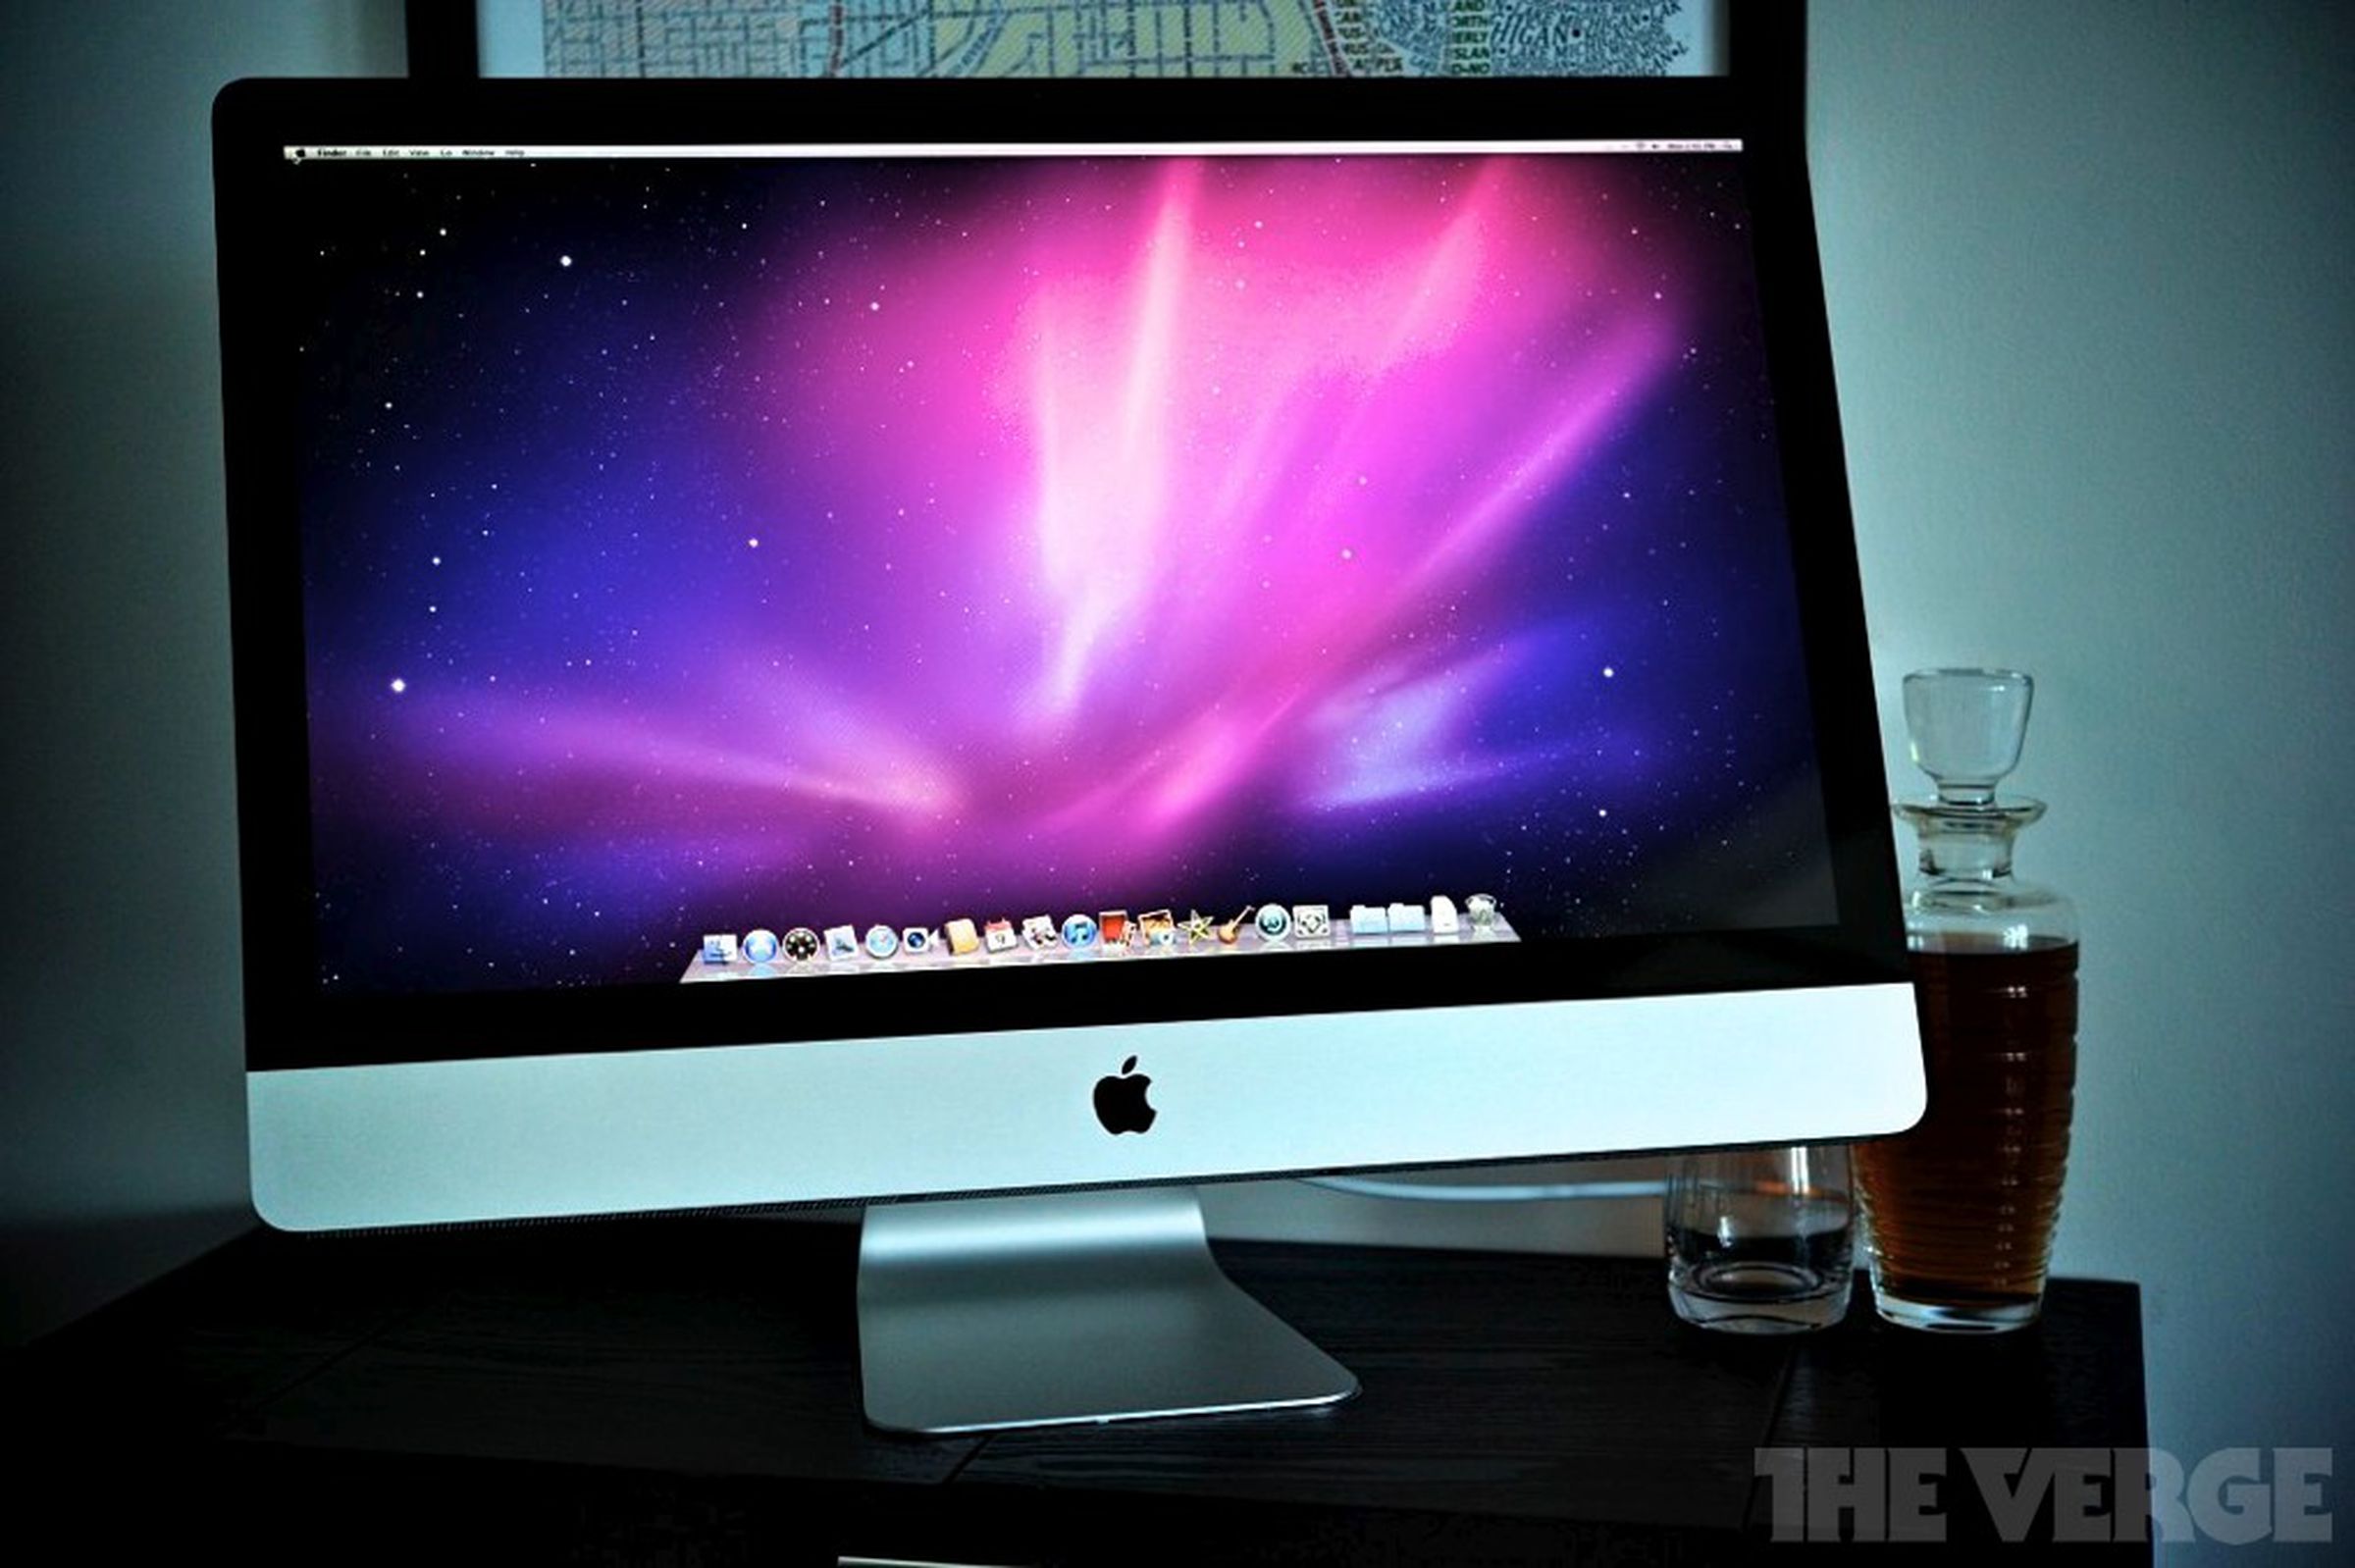 There’s four notebook-sized RAM slots accessible under the chin of this aluminum iMac.